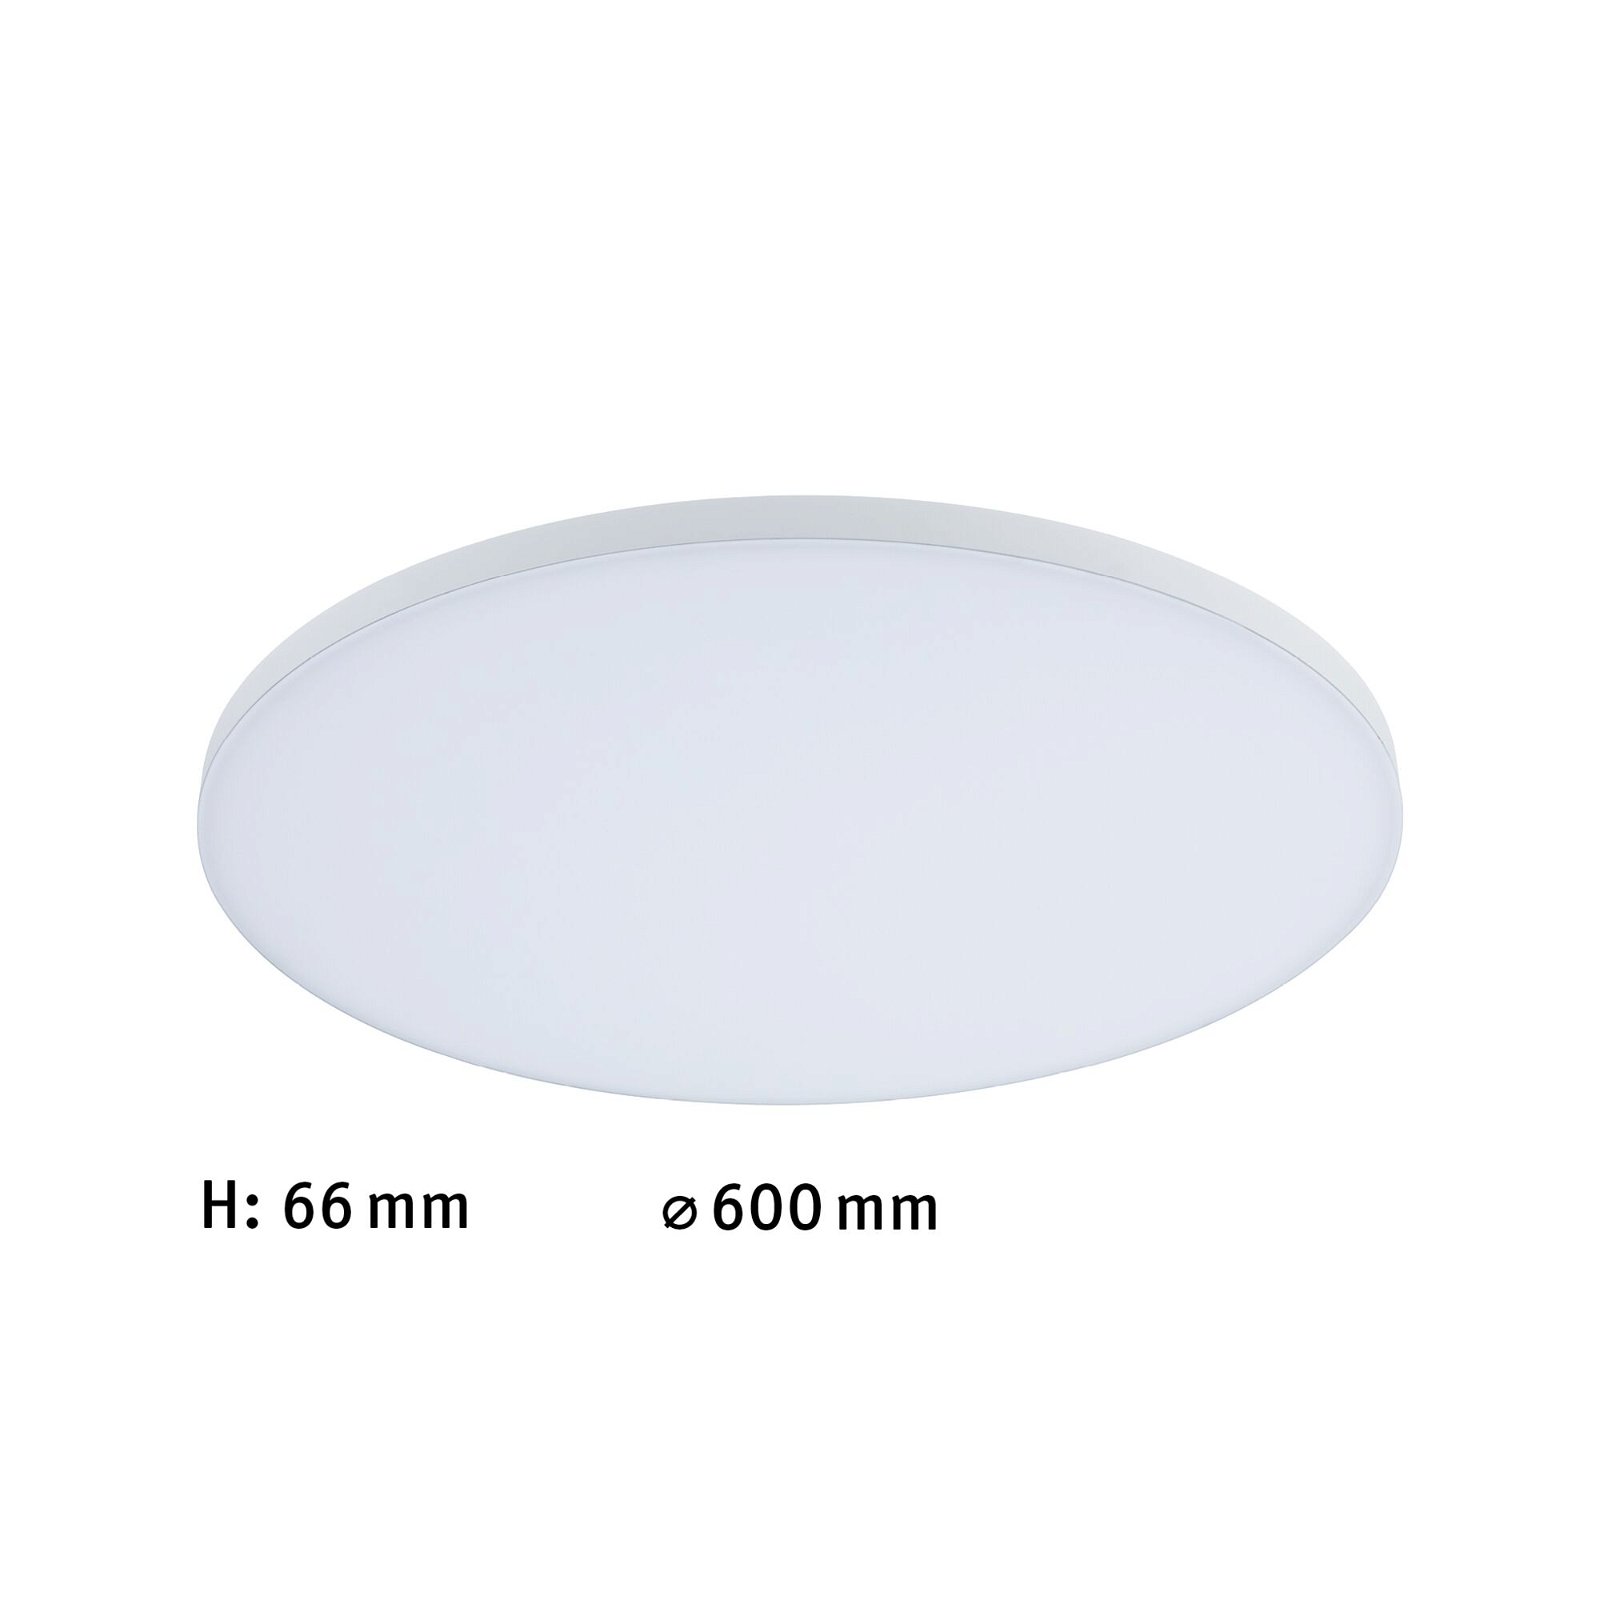 LED-paneel Velora rond 600mm 38W 3650lm White Switch Wit